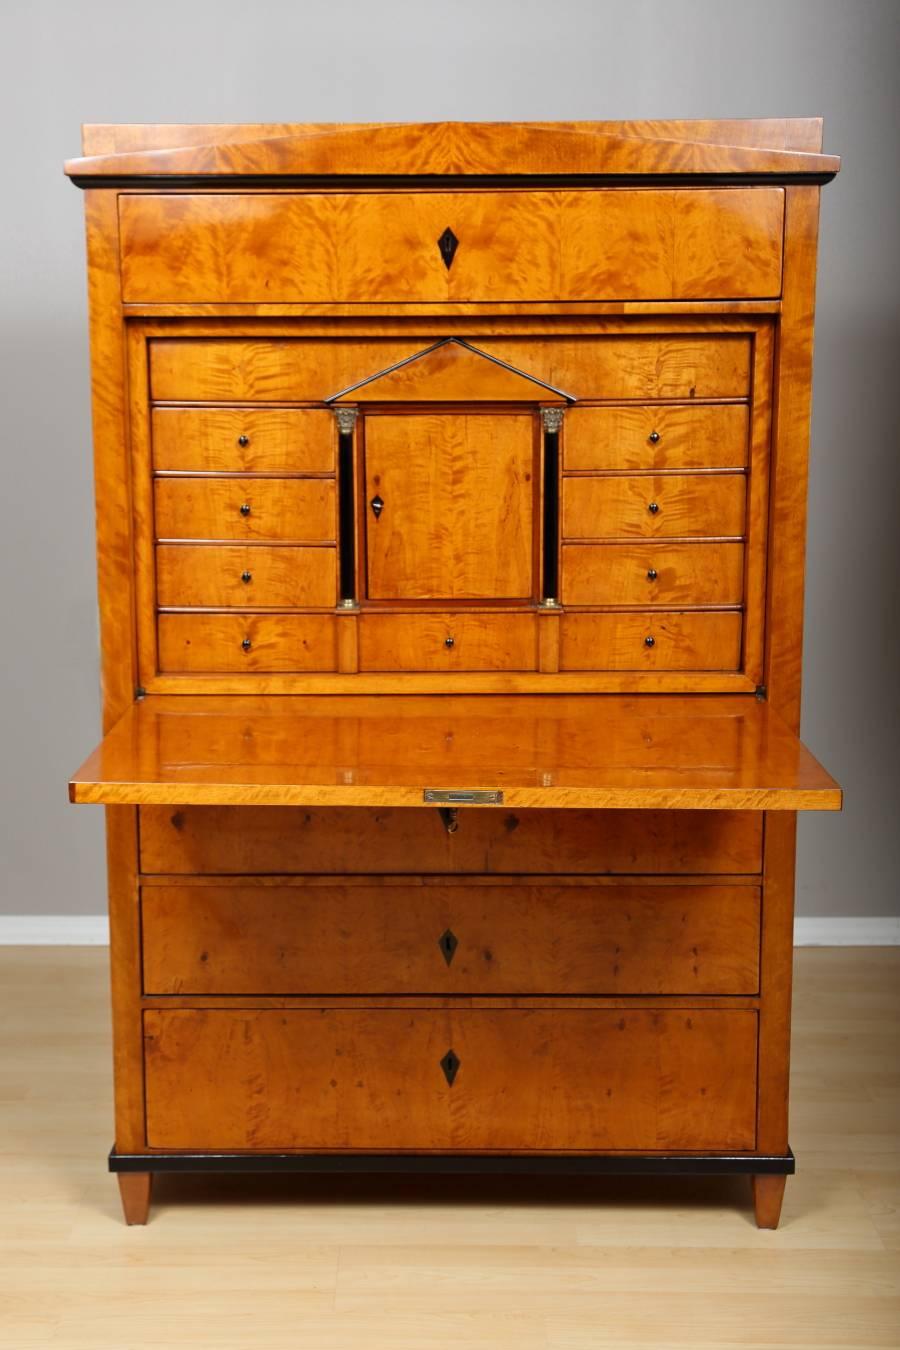 Biedermeier Birch Secretaire, circa 1820. This elegant secretary, handcrafted in Germany, features three large drawers at bottom, and one large drawer above the fall front surface. The interior of the fall-front reveals several smaller drawers